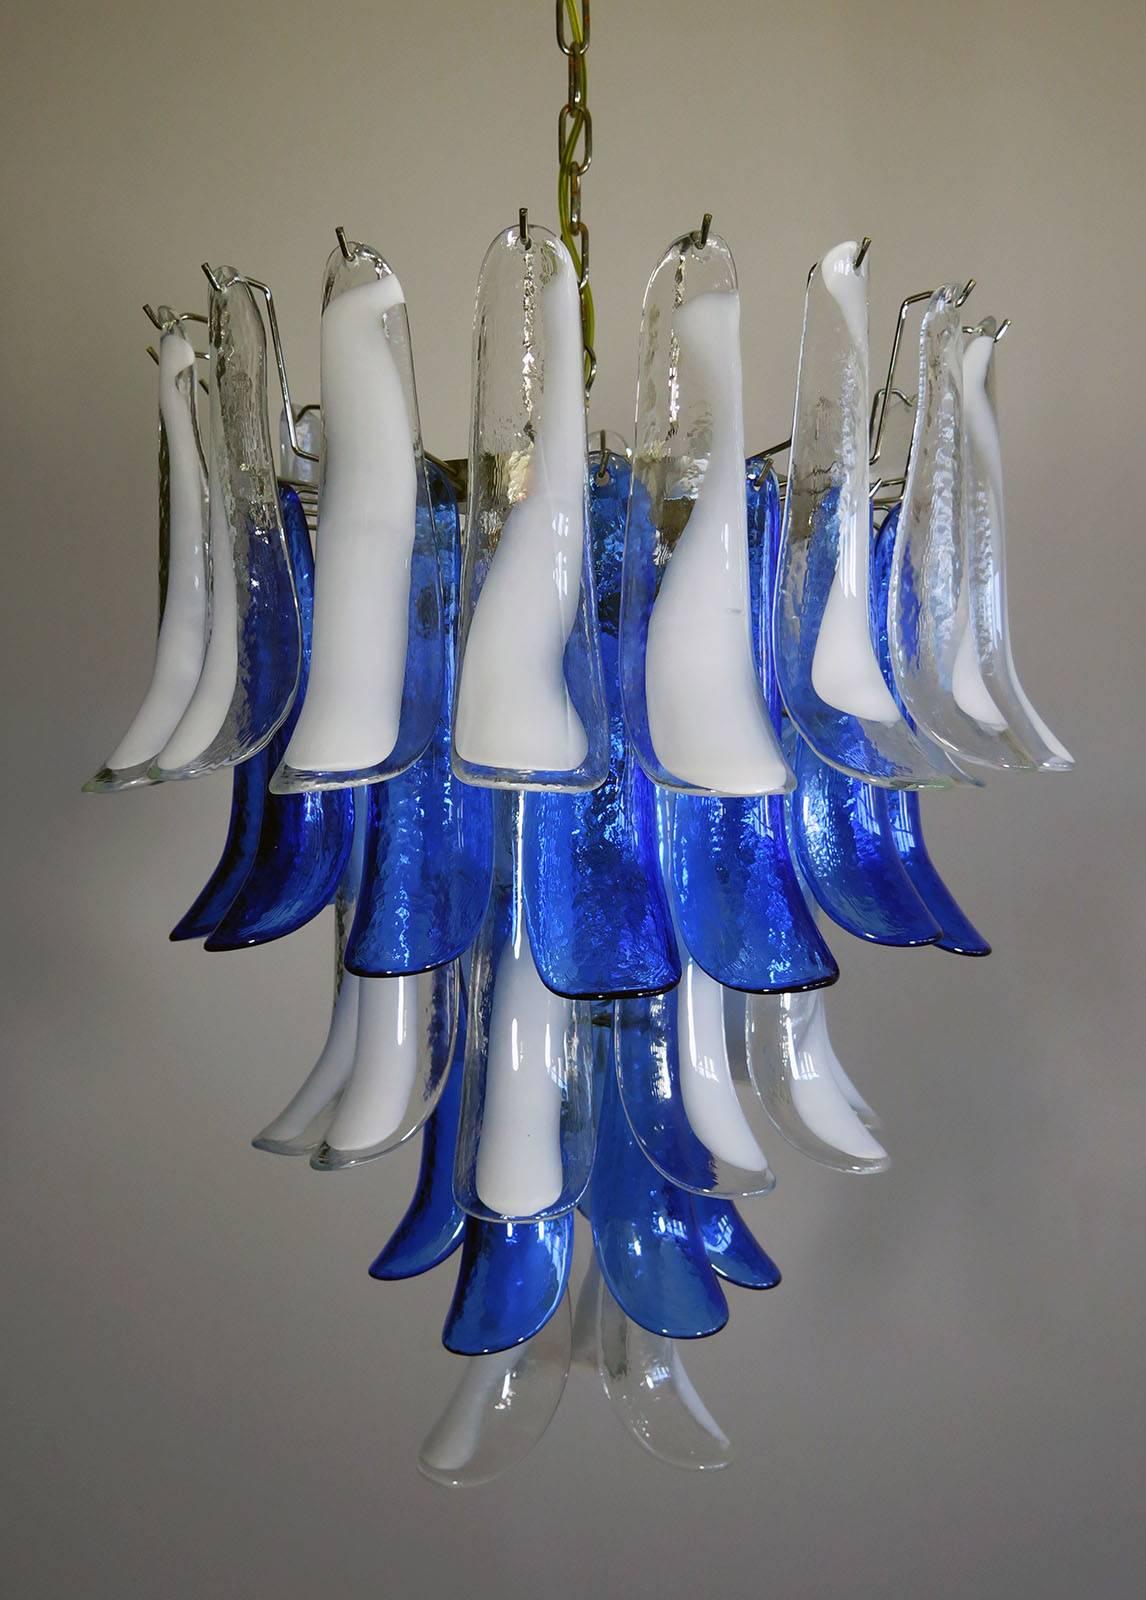 Huge Italian vintage Murano chandelier made by 52 glass petals with a chrome frame. The glasses have two colors:
31 glass petals transparent and white “lattimo” +21 glass petals blue color.
available 4 pairs.
Period: 1970s-1980s.
Dimensions: